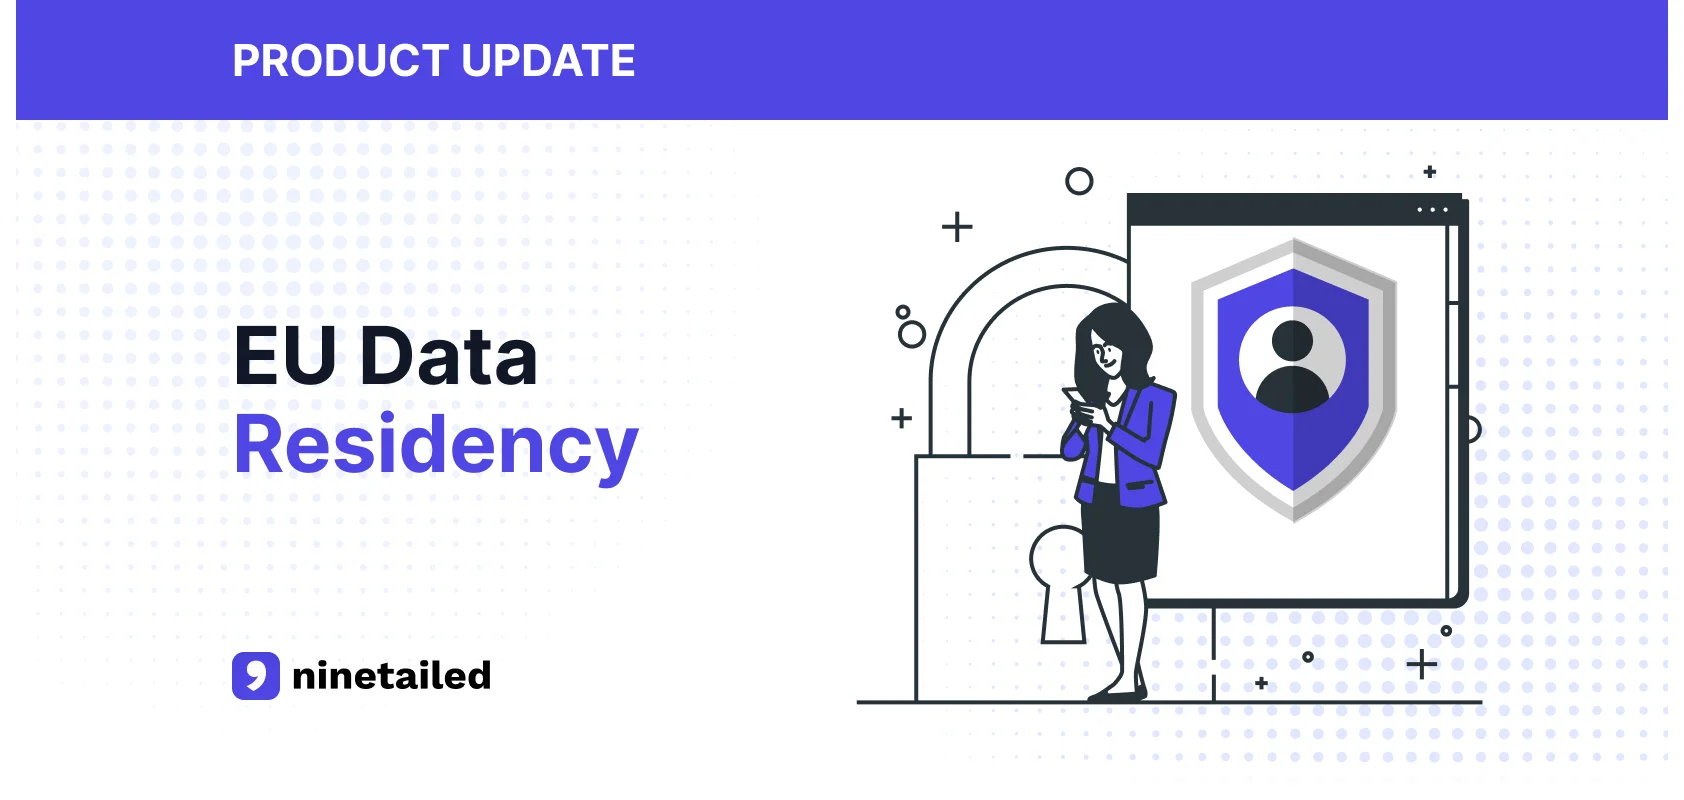 Introducing EU Data Residency: Taking Data Security and Trust to the Next Level